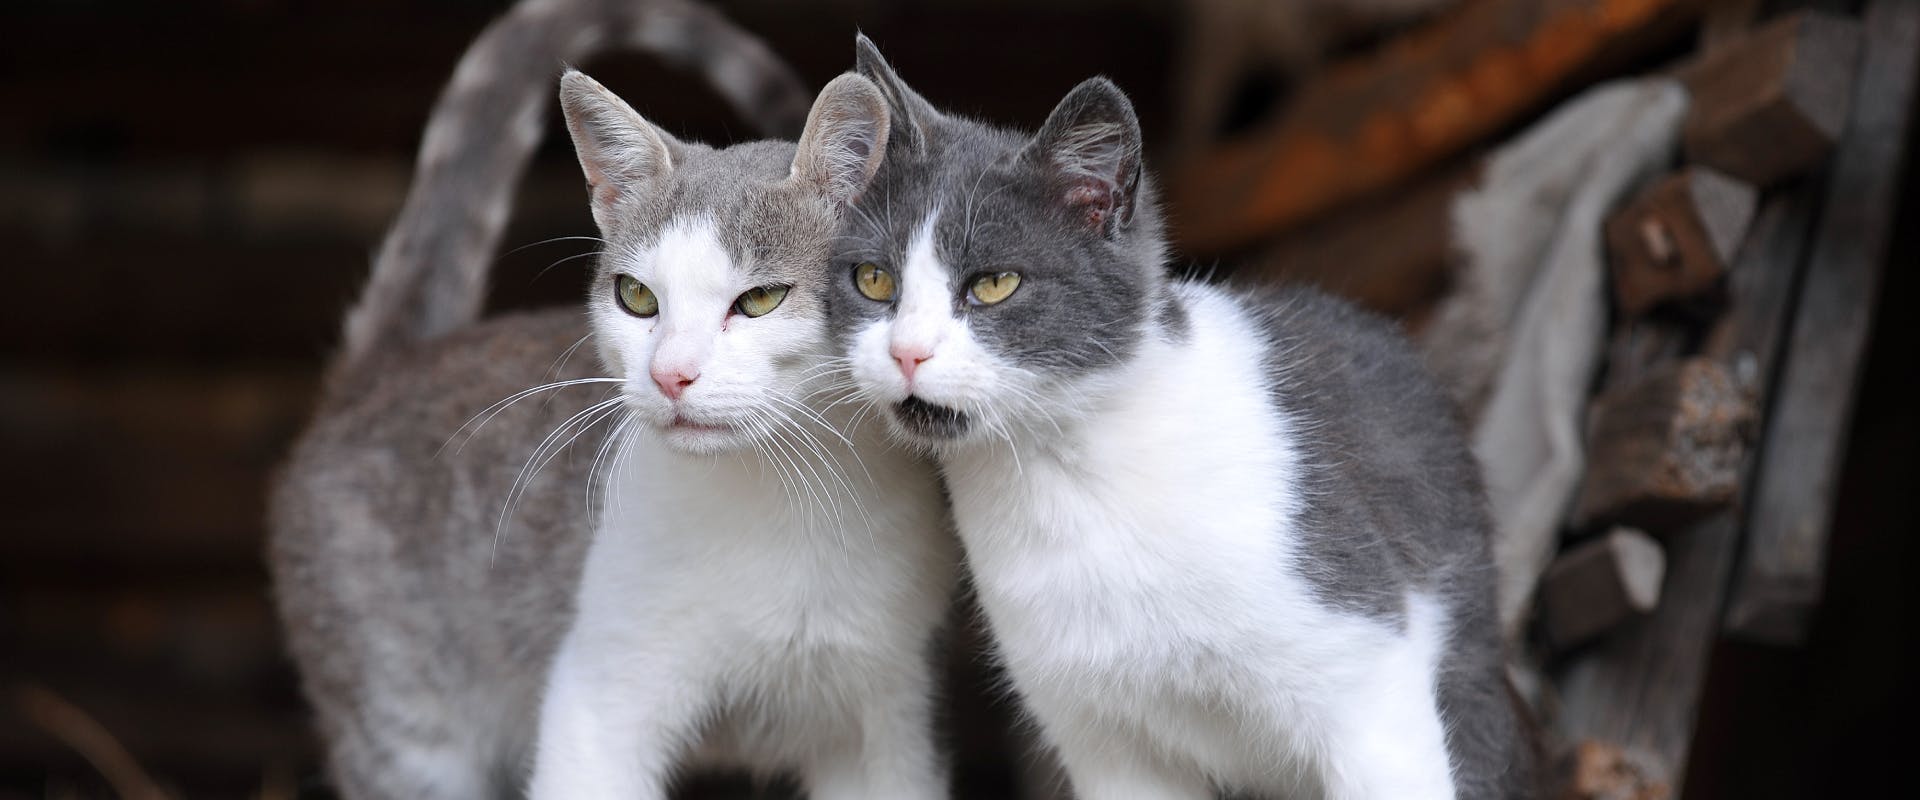 two gray and white cats stood in a barn doorway rubbing cheeks and look out past the camera